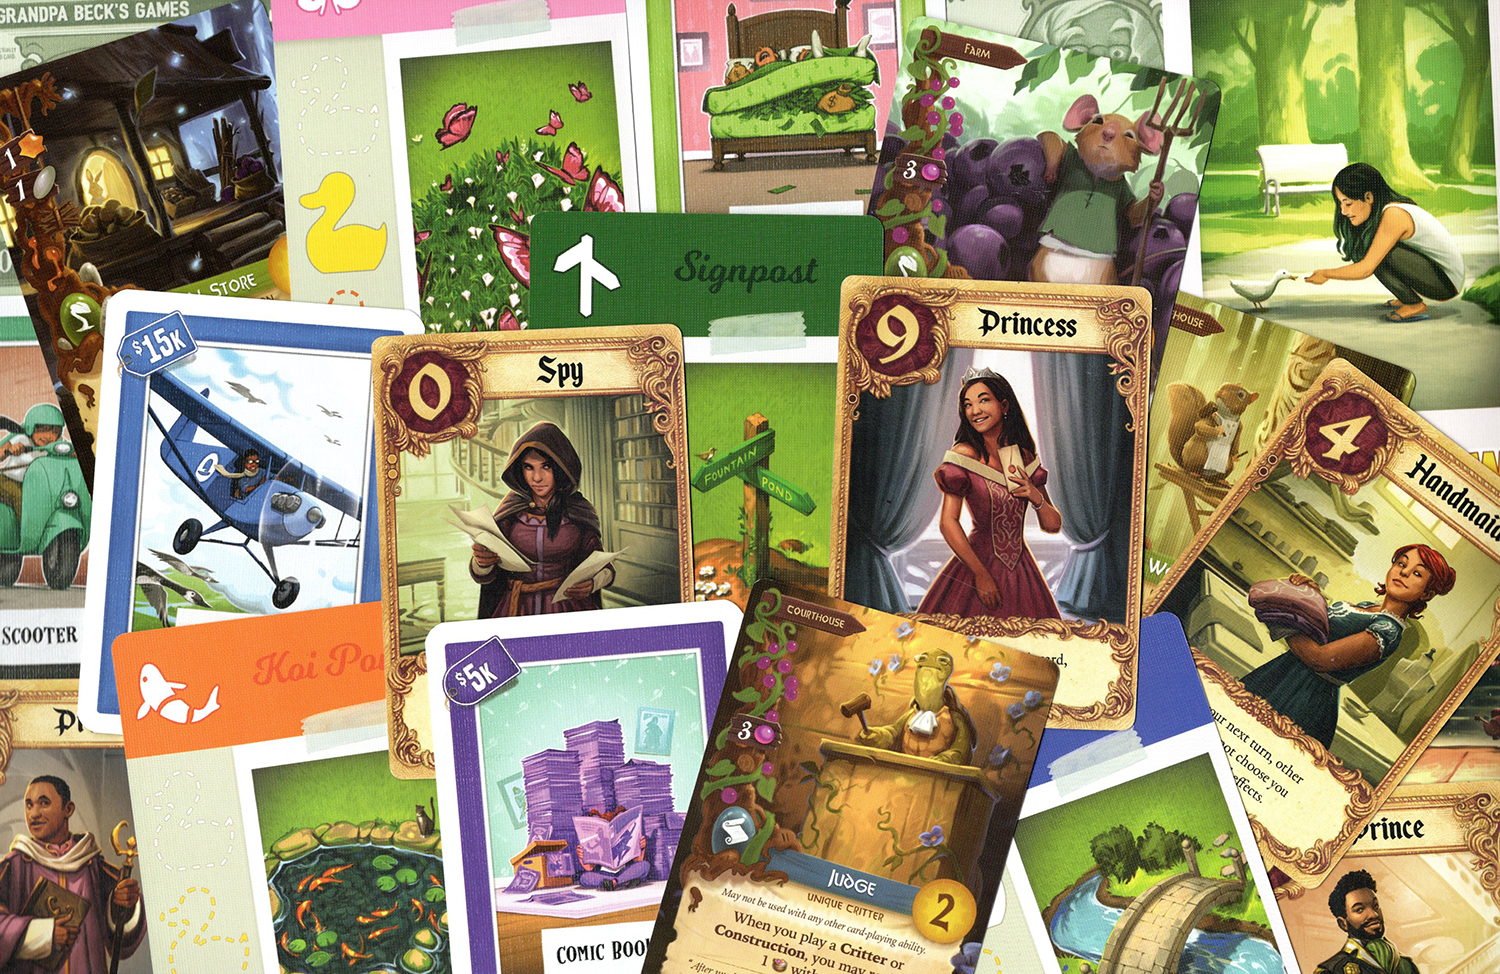 Montage of Andrew Bosley artwork including Everdell, Cover Your Assets, Love Letter and Ducks in Tow.         
Image ©BoardGameReviewUK